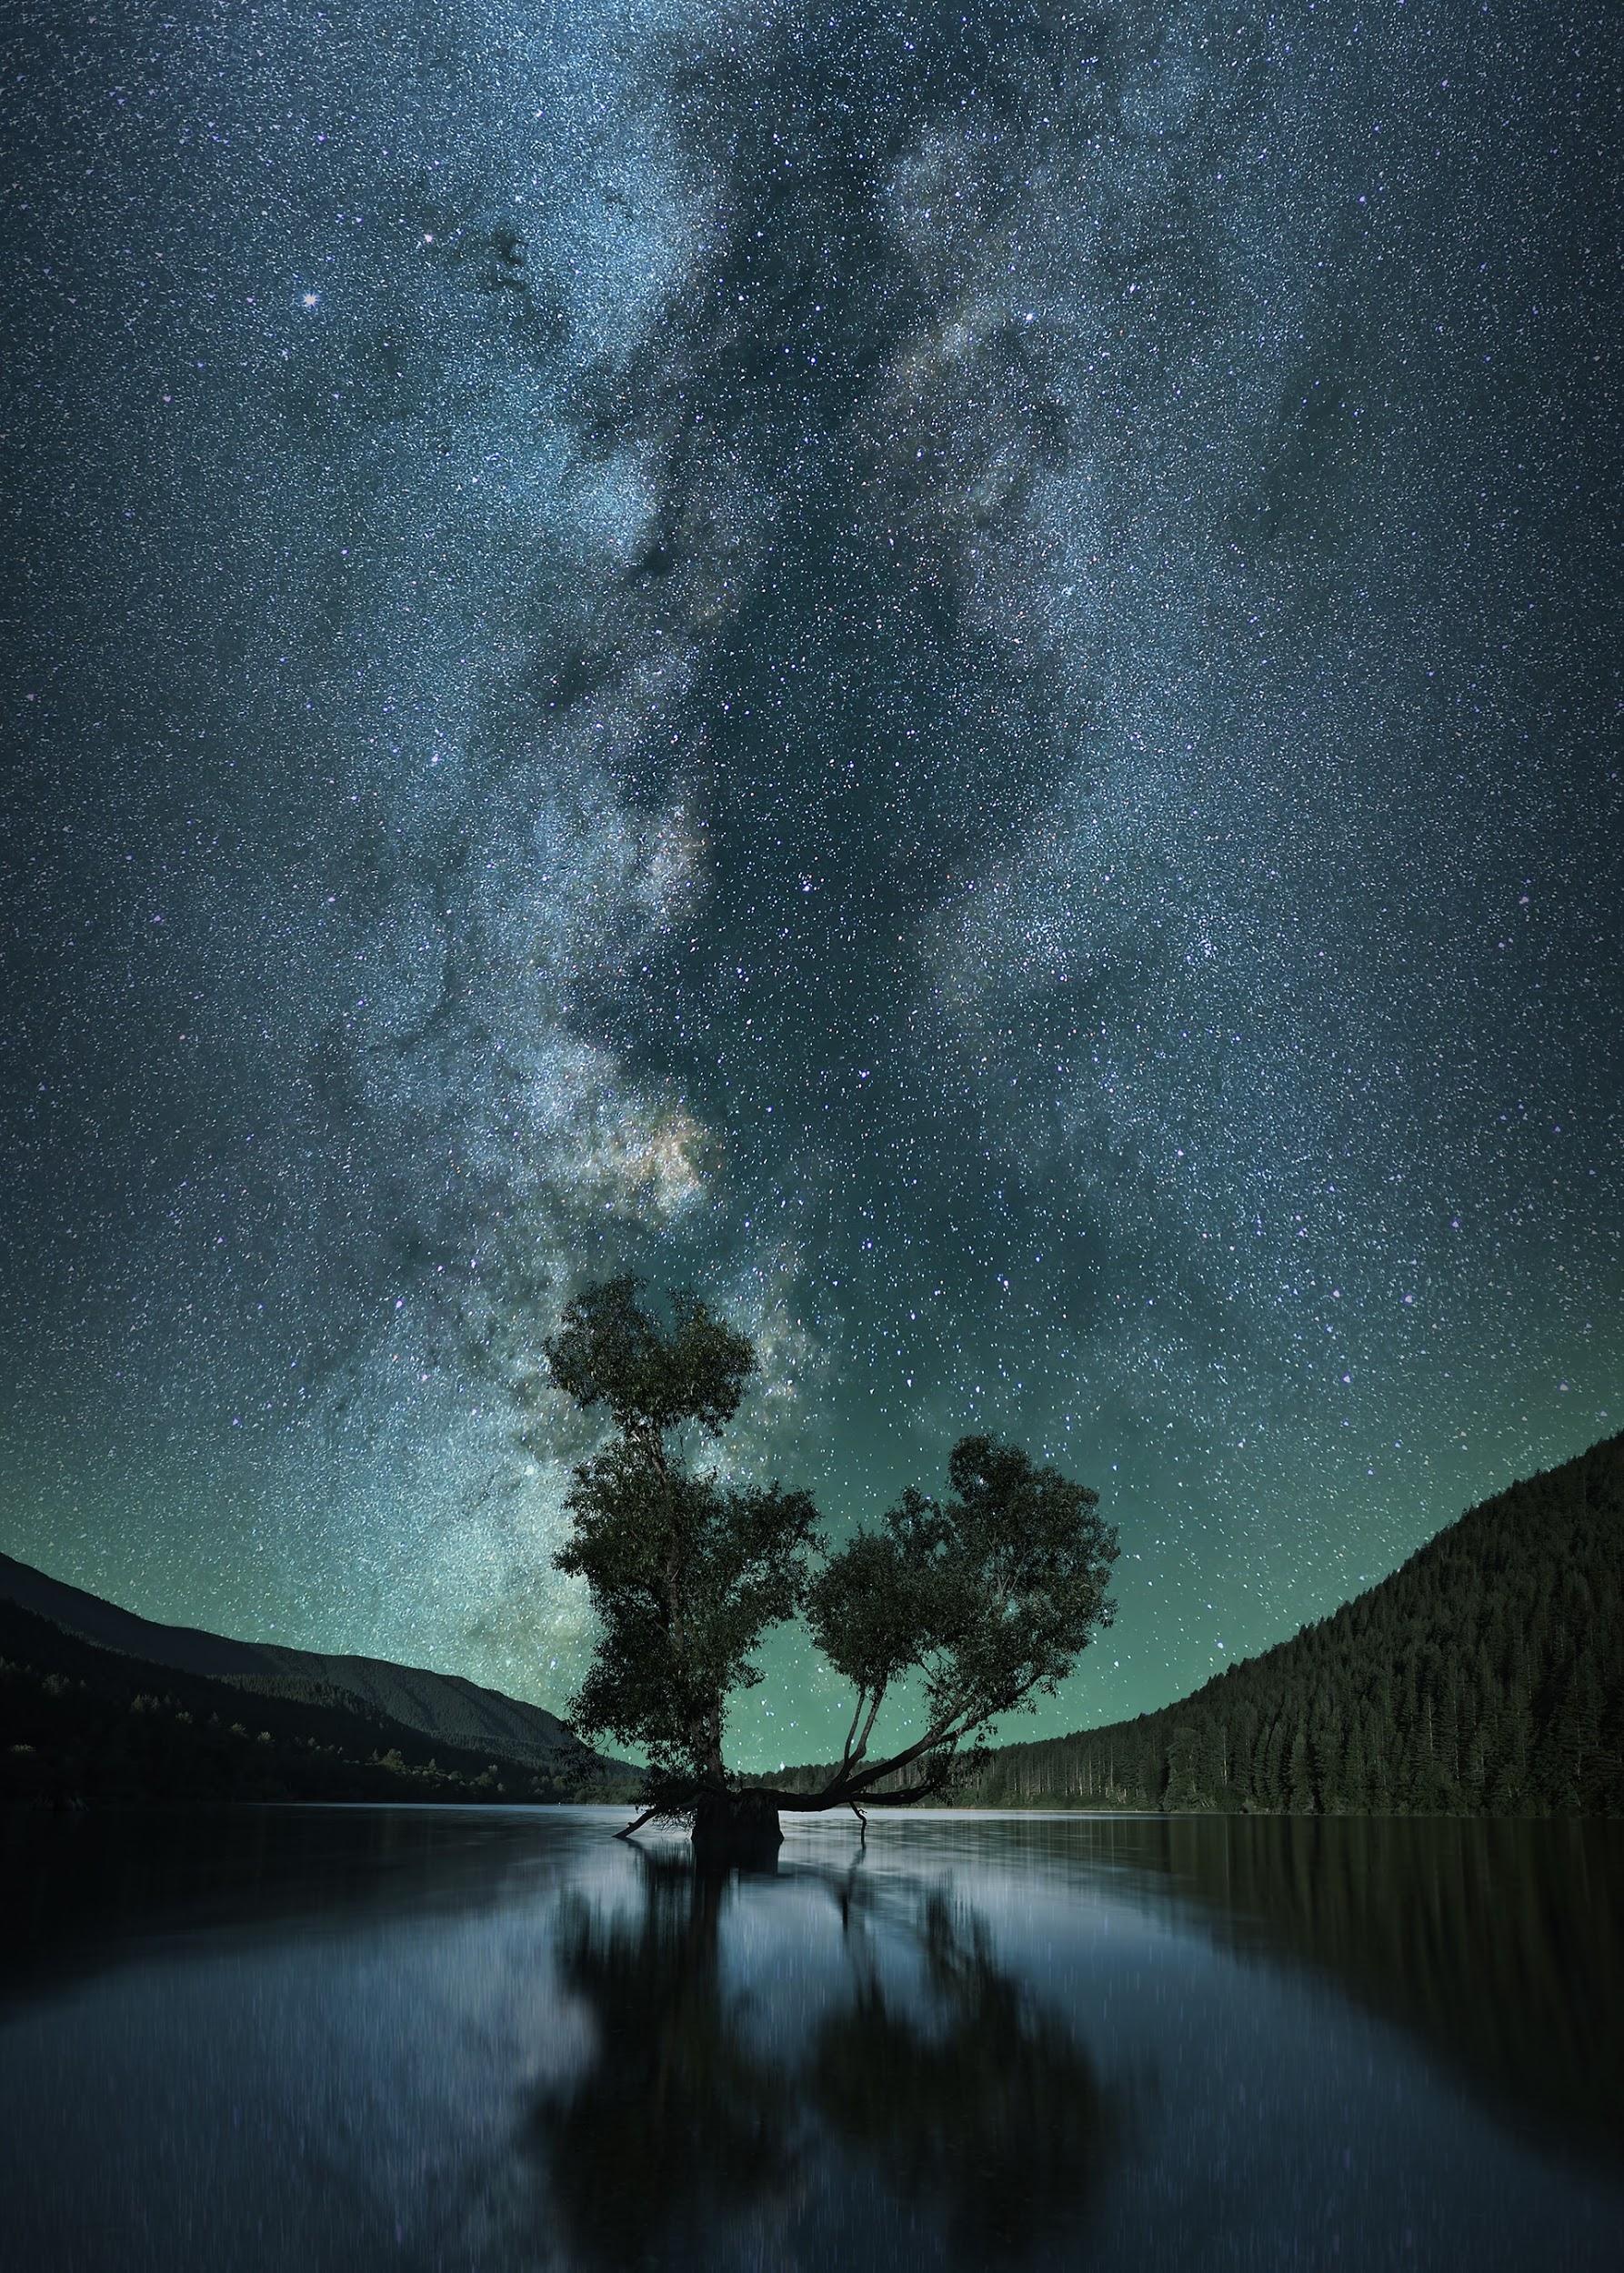 A single tree in a lake and a sky full of stars